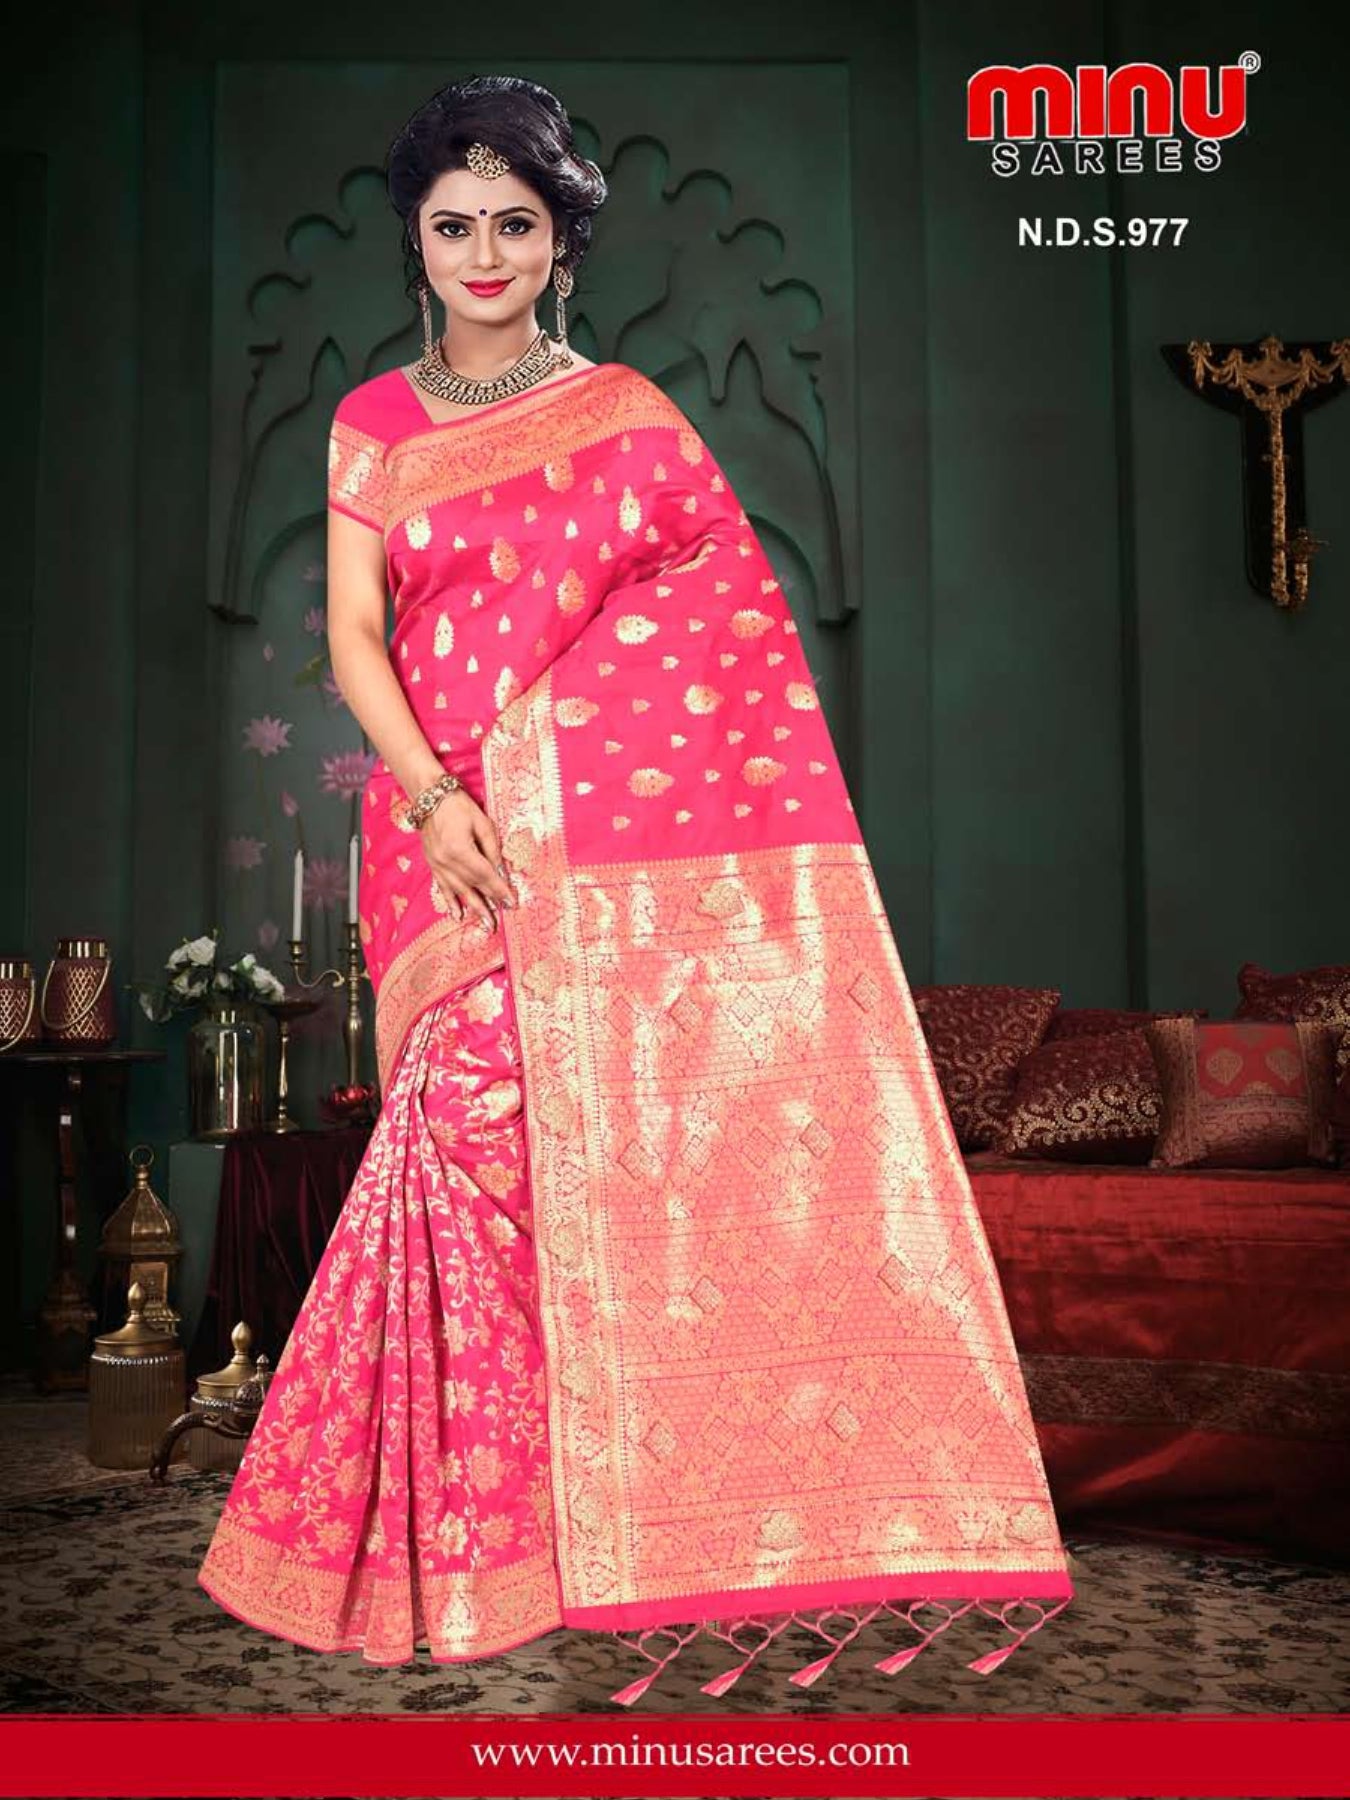 Fancy saree with modern red color wearing woman image